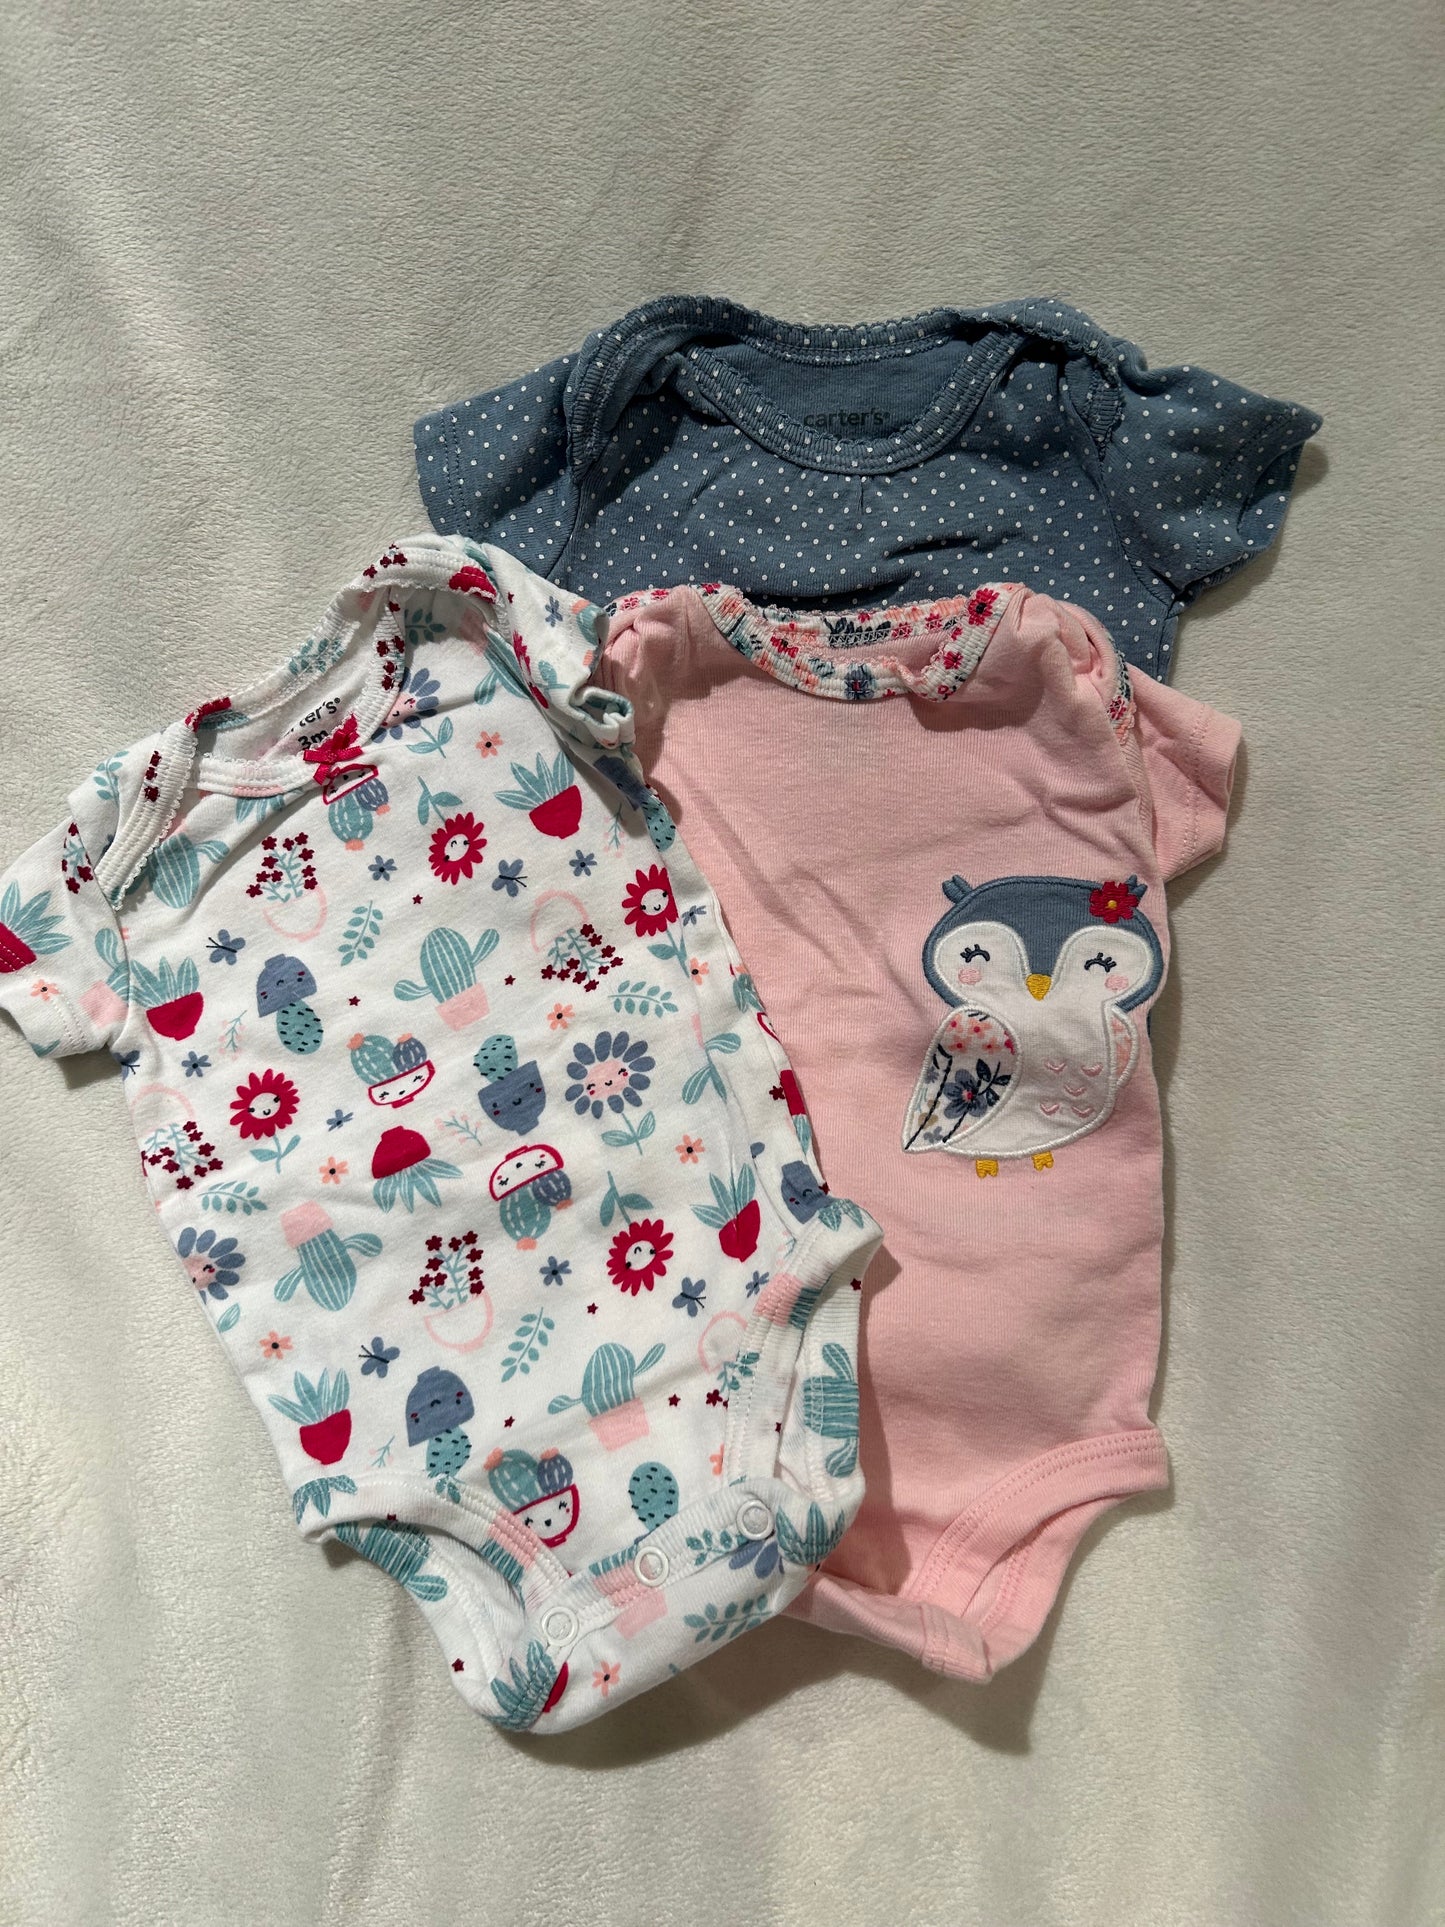 Carter's 3 months onesies - set of 3 (Blue with white dots / Pink with bird / White with cactus)